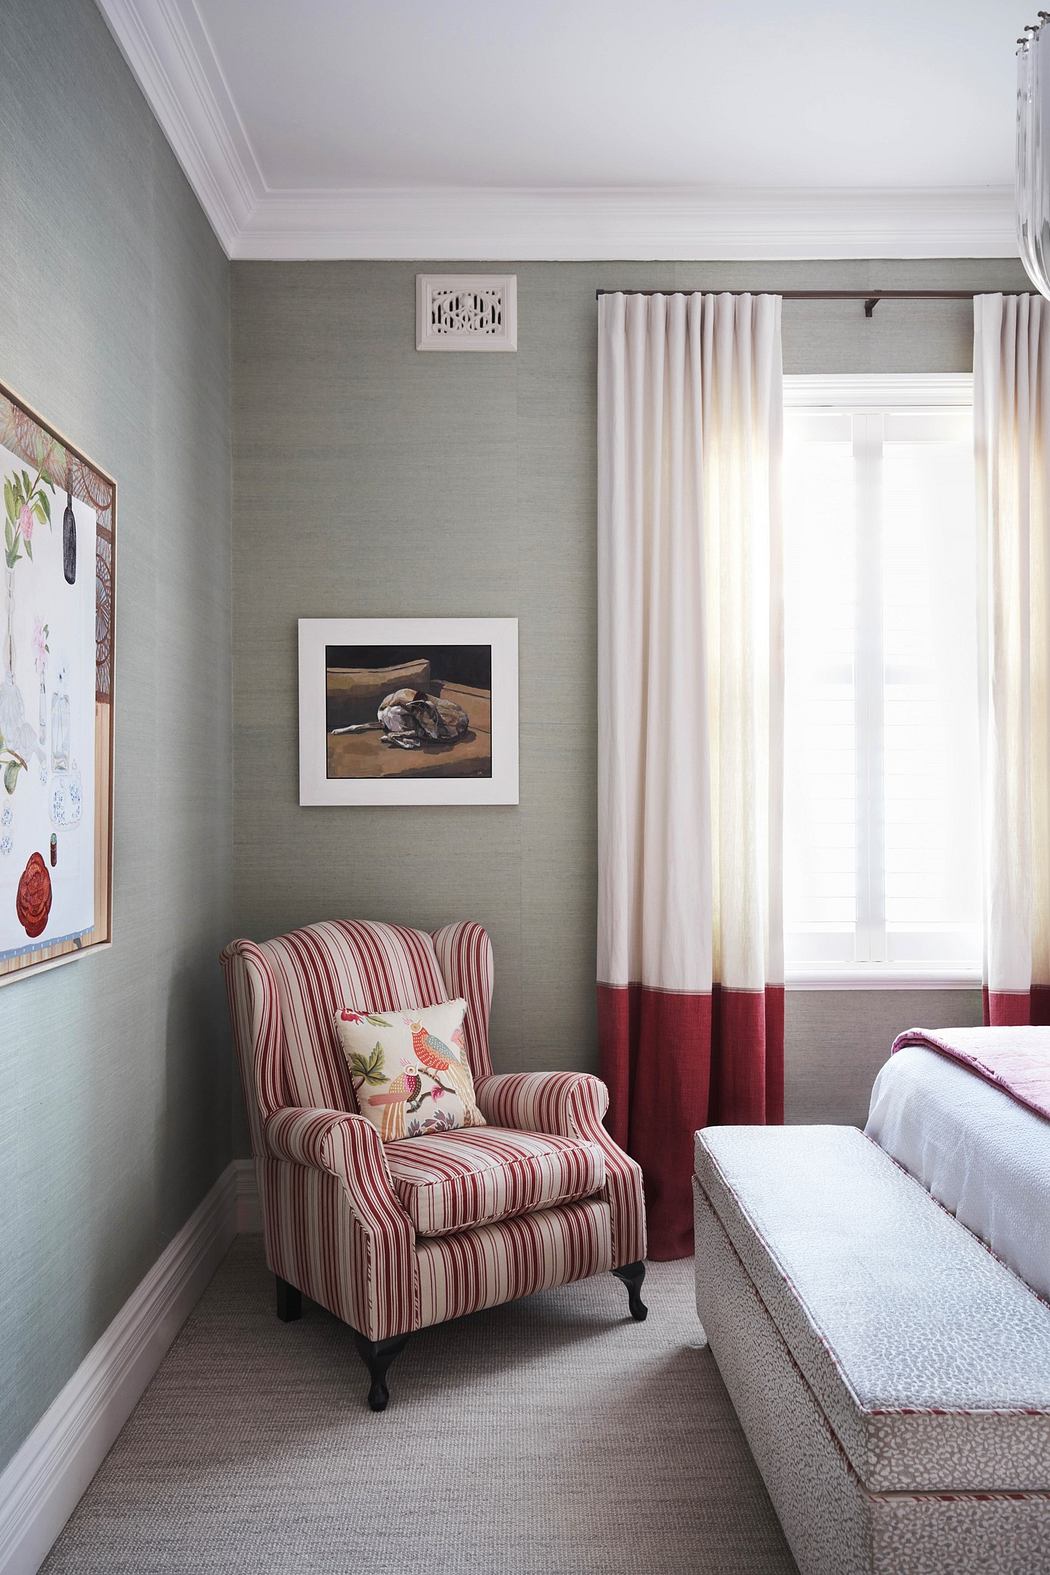 Elegant bedroom corner with striped armchair, artwork, and dual-tone curtains.